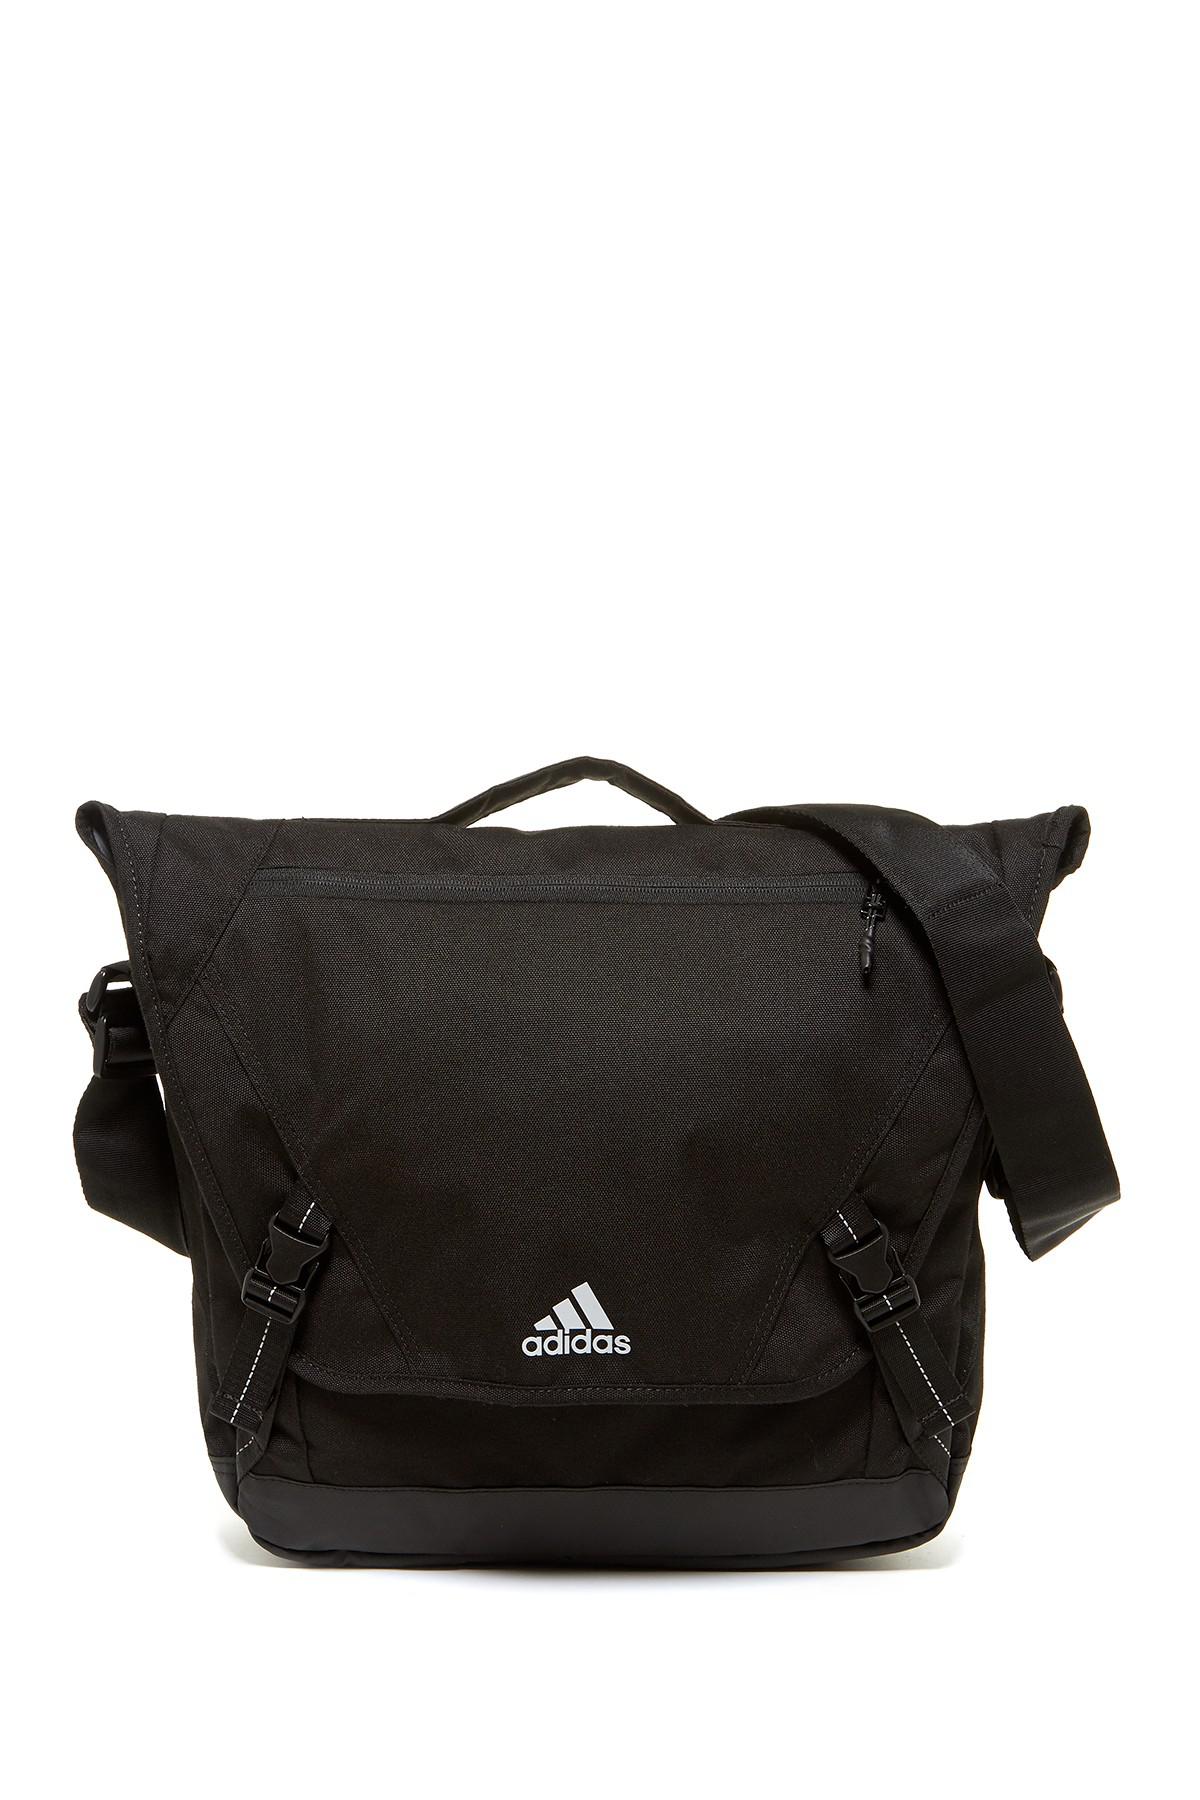 adidas Sport Id Messenger in Black for 